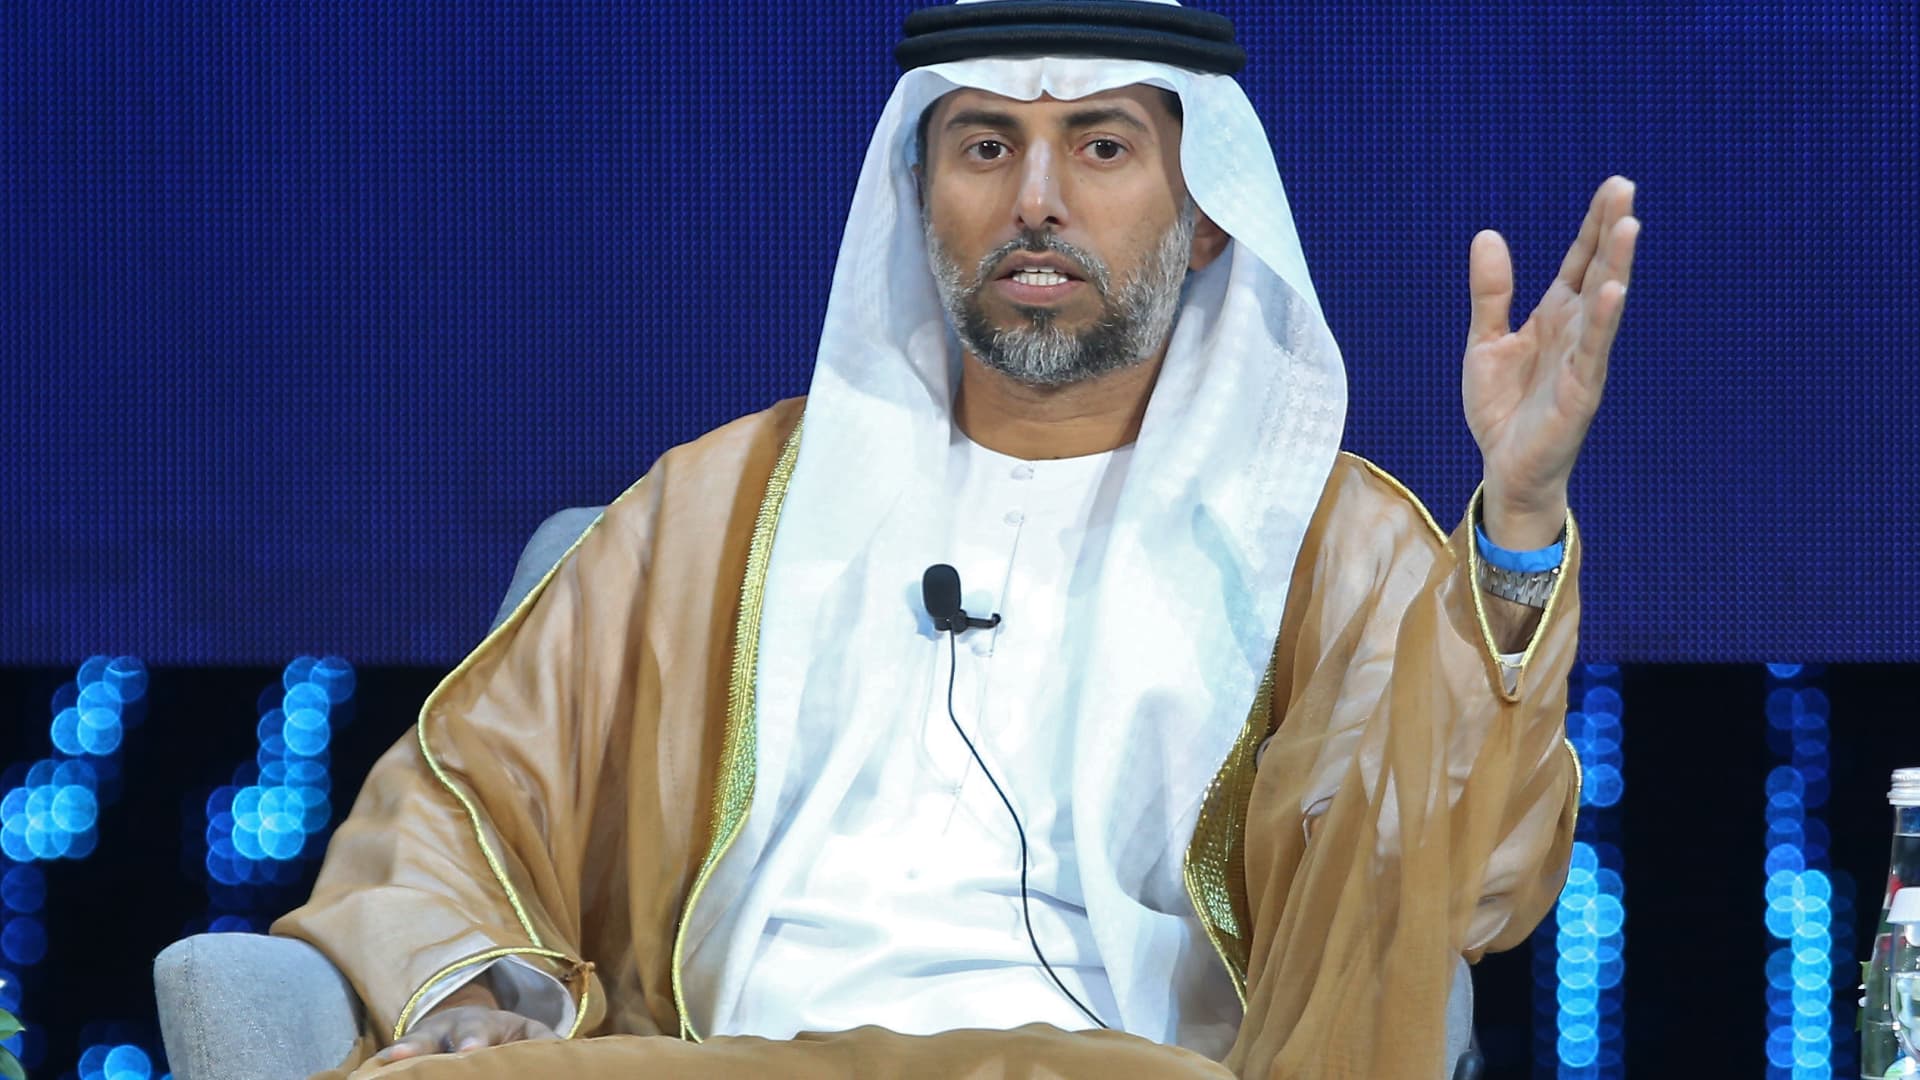 JPMorgan’s calls for a reality check on energy transition are sensible, UAE energy minister says